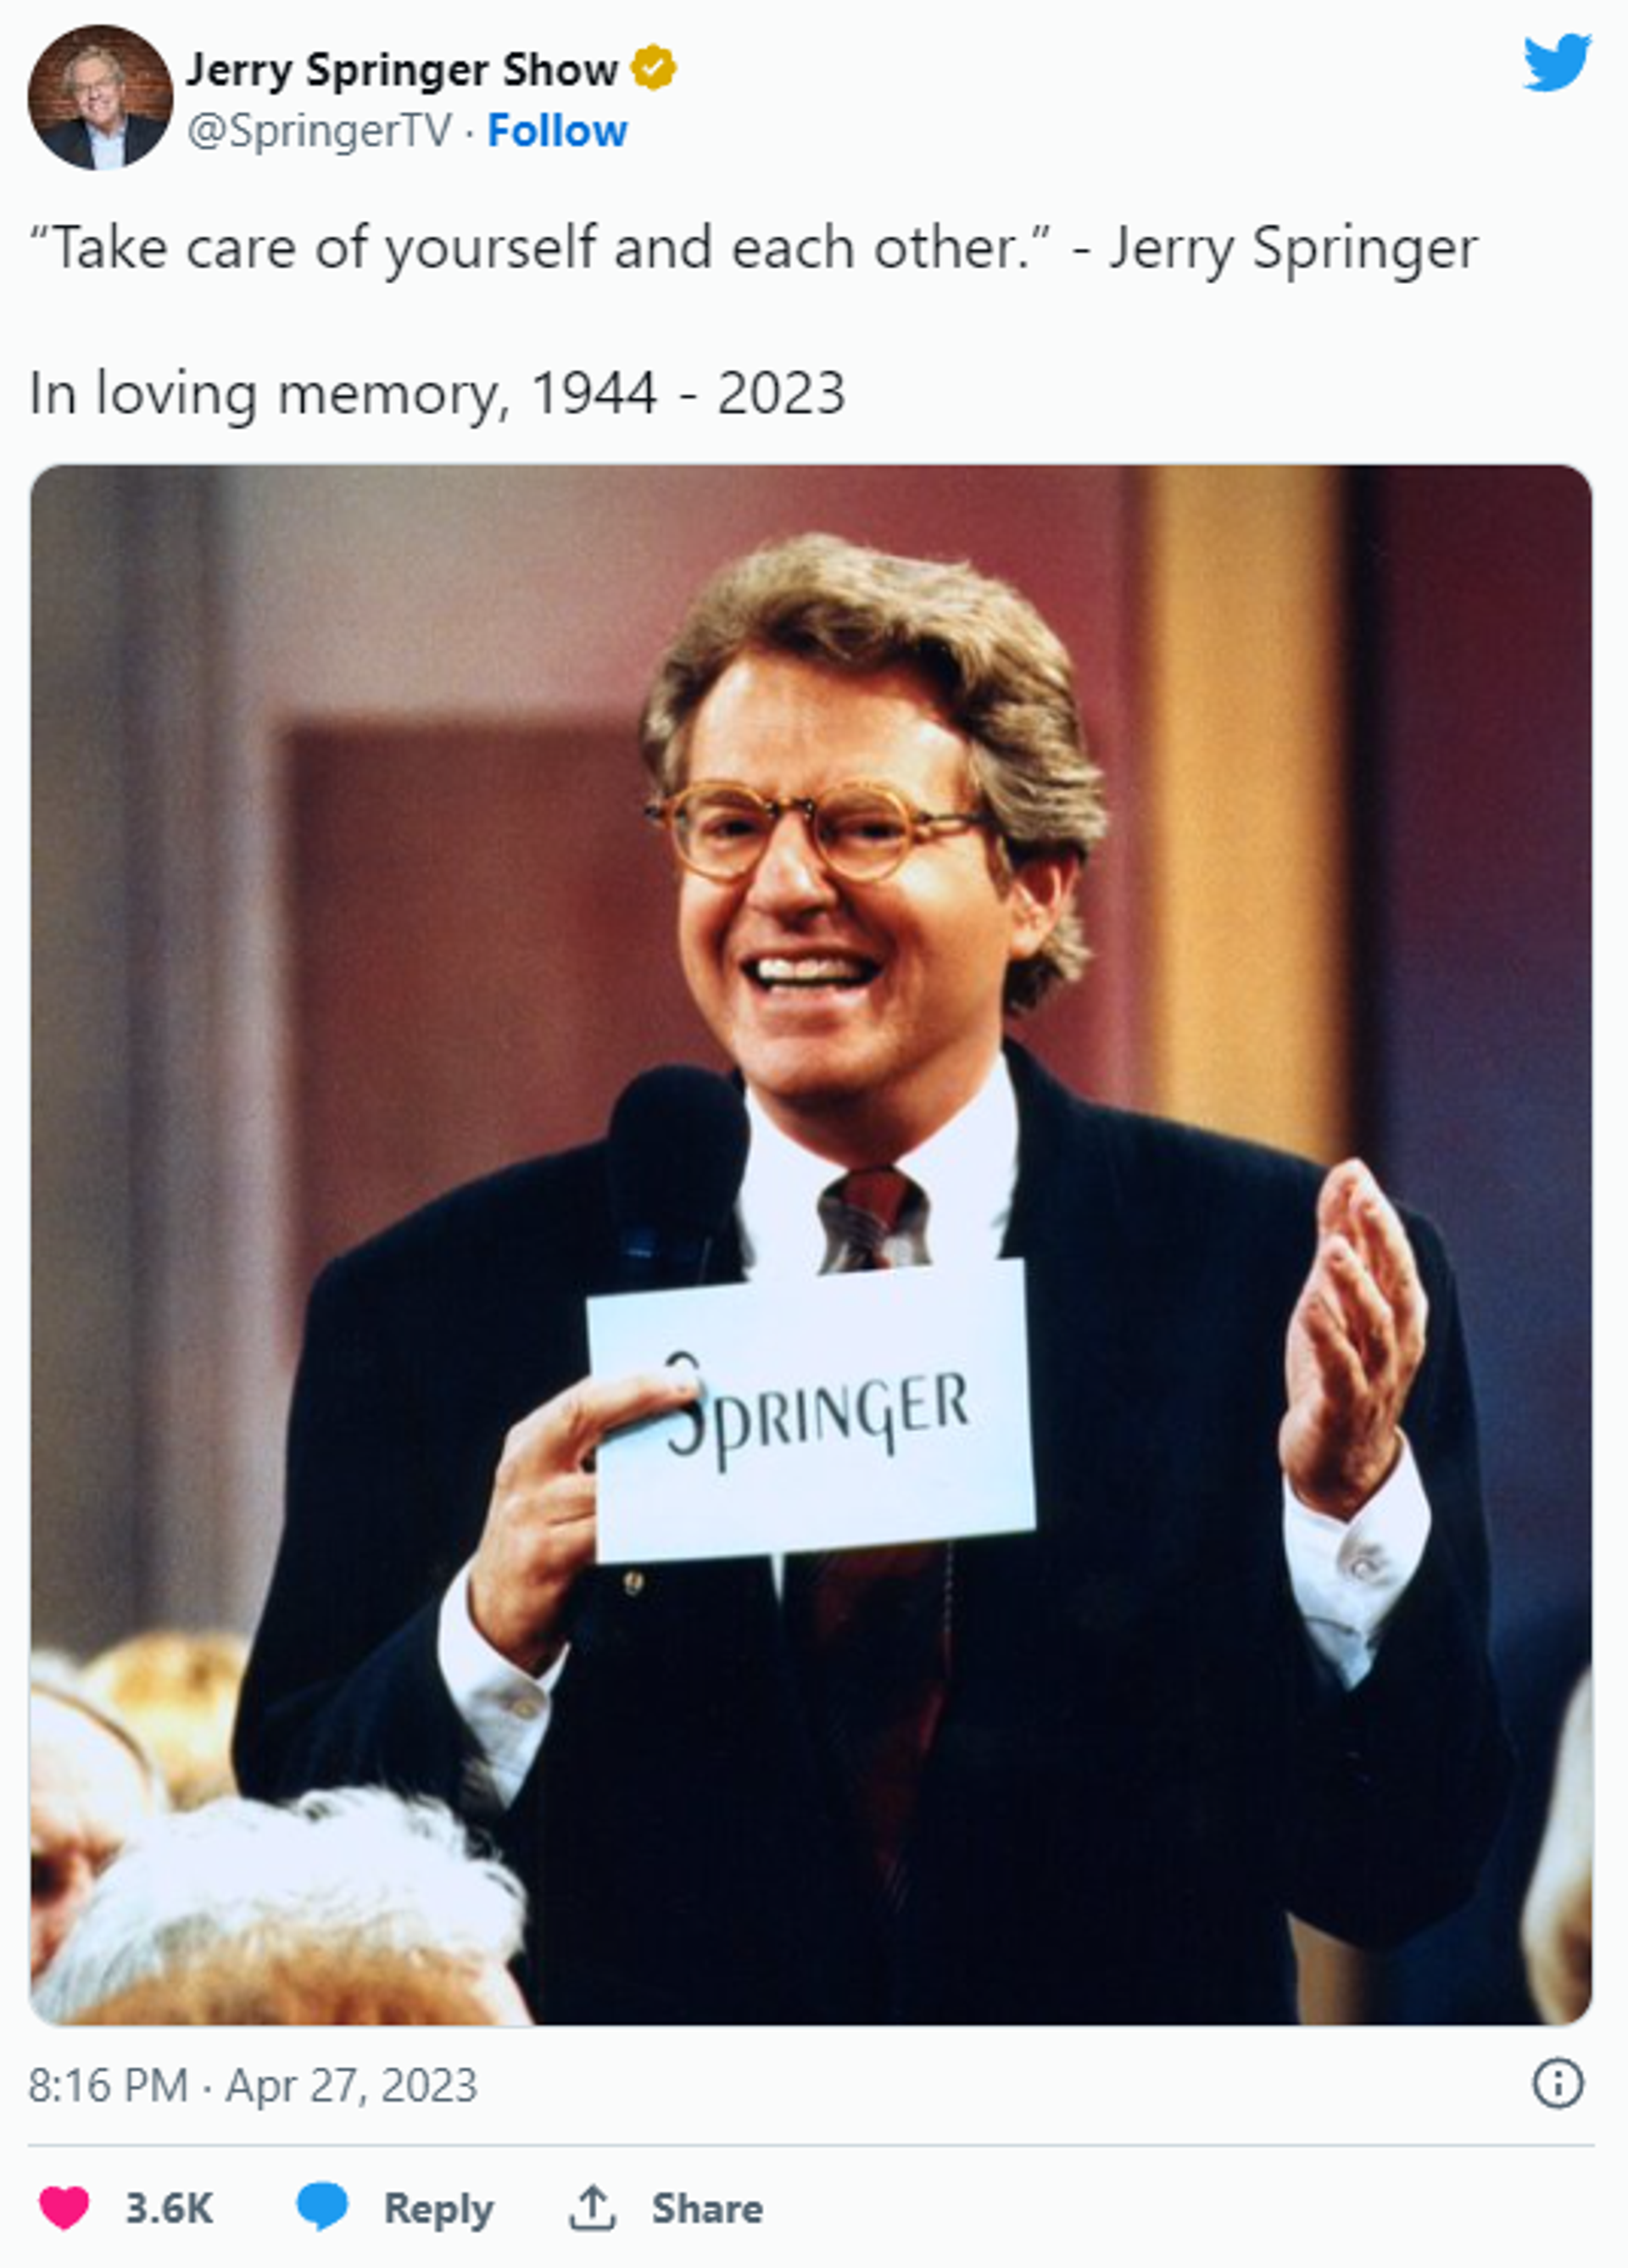 A post on The Jerry Springer Show's official account honouring its host death. - Sputnik International, 1920, 27.04.2023